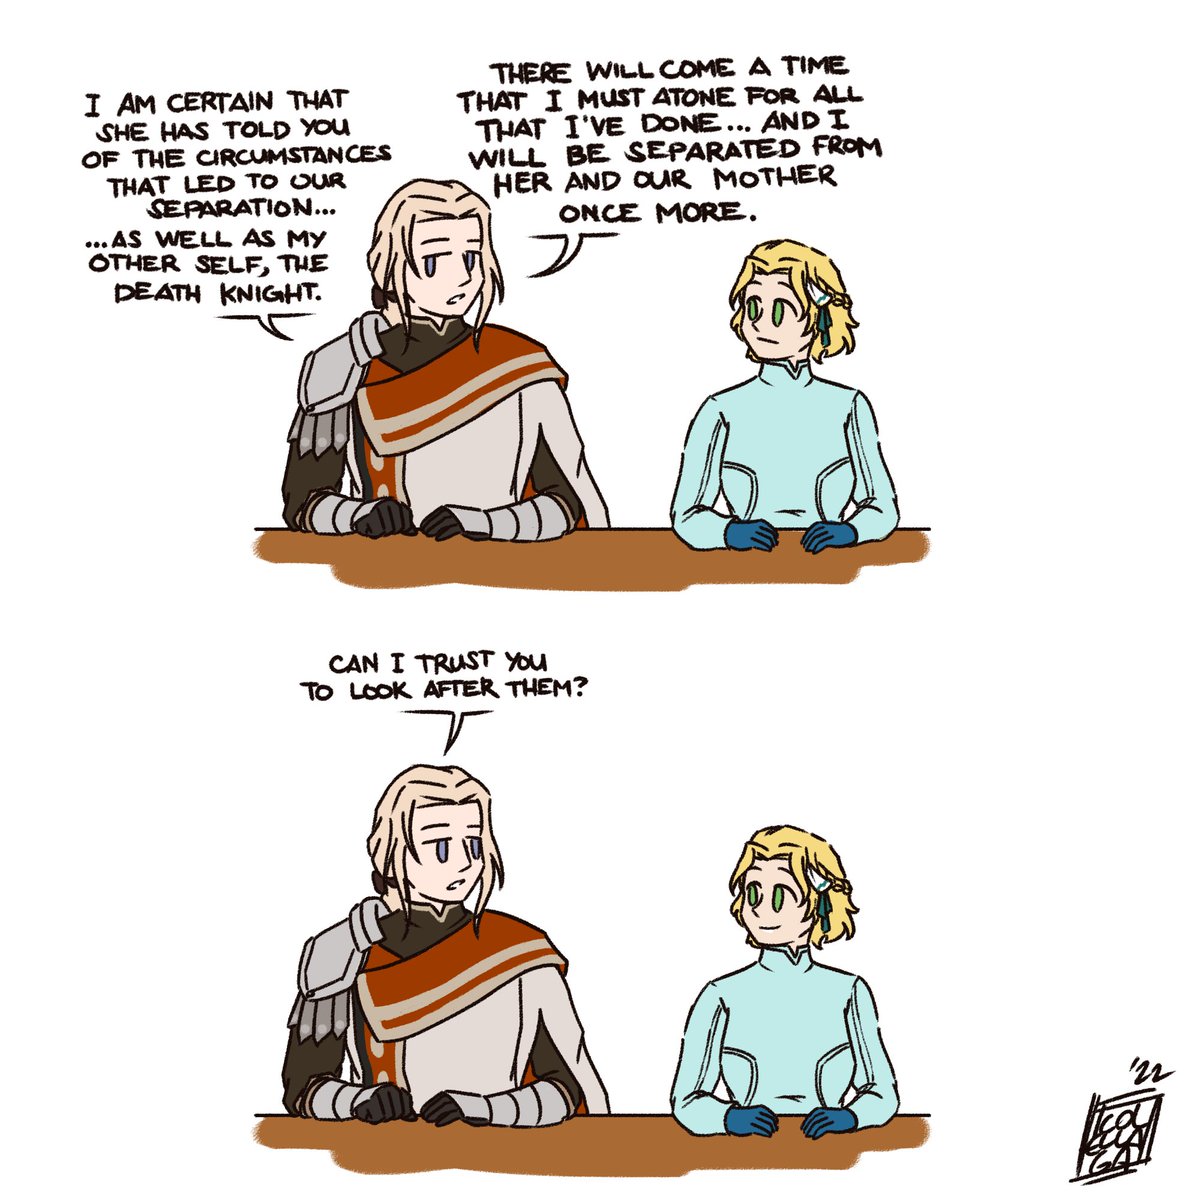 heart-to-heart talk with the bro at denny's--i mean, the dining hall
#FE3H #mercigrid 